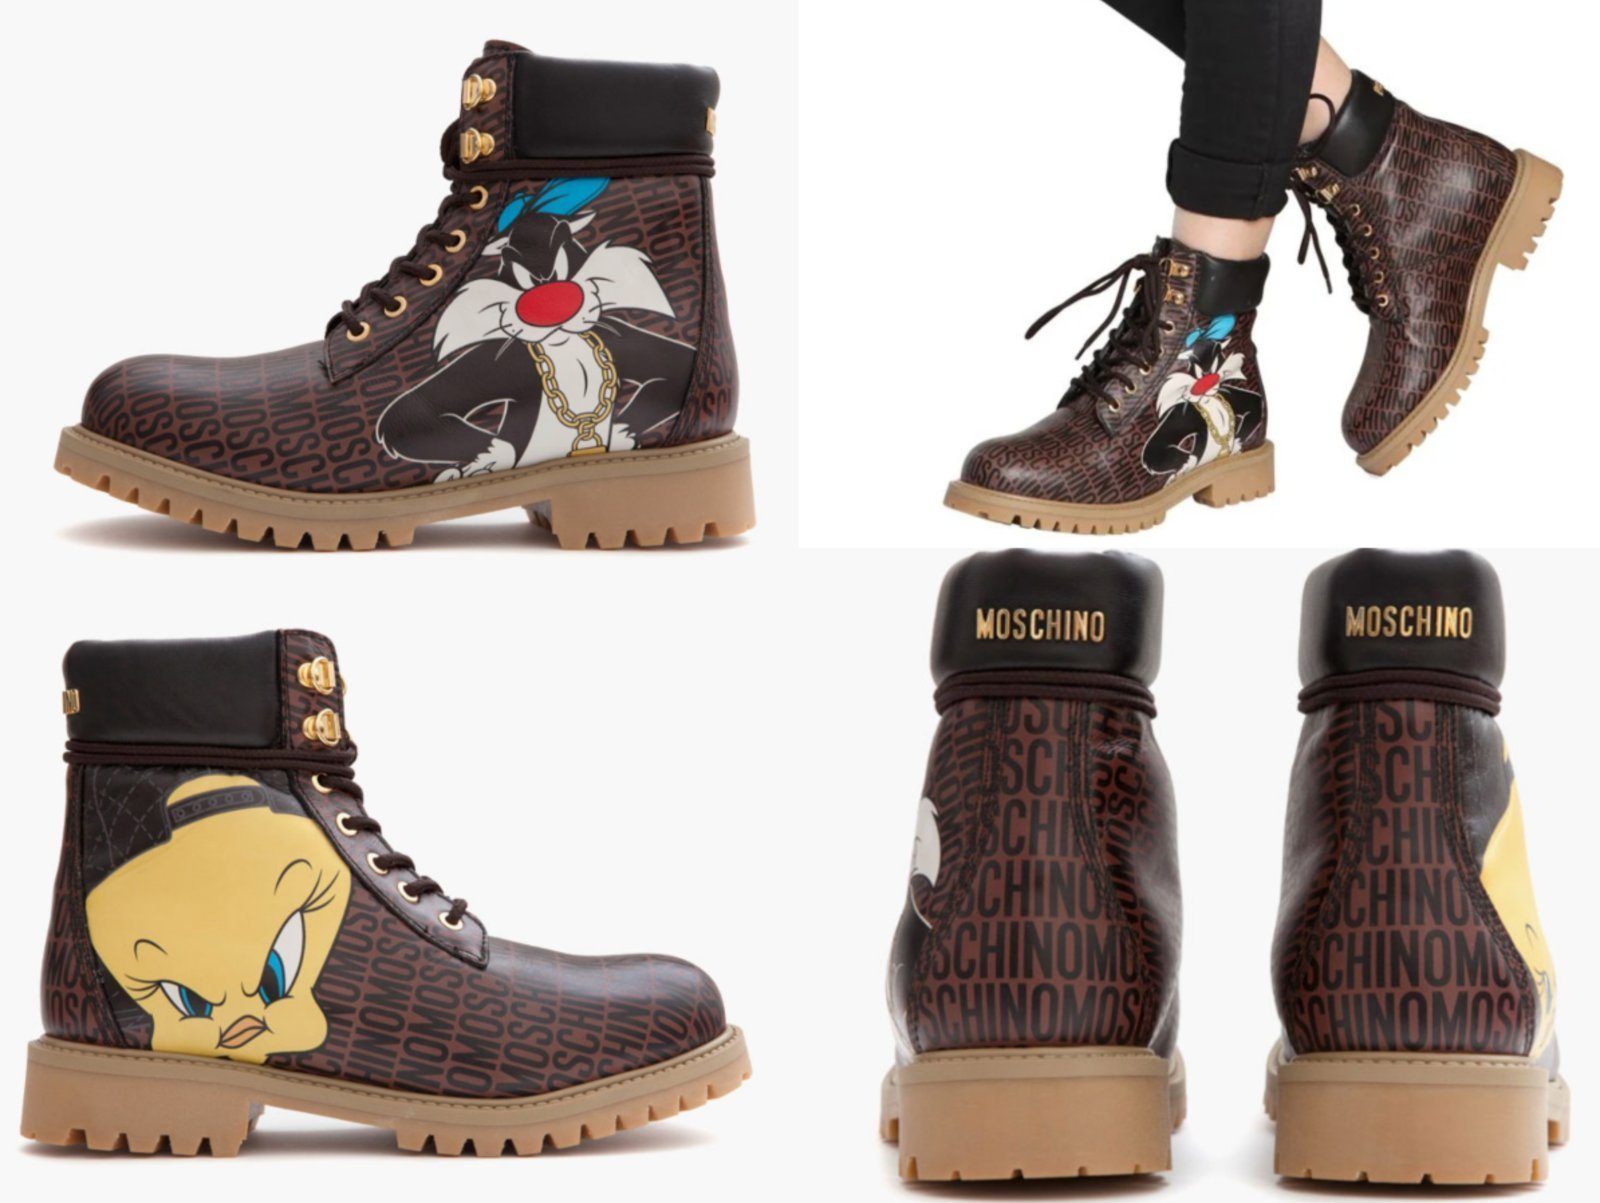 Moschino MOSCHINO DEADSTOCK LOONEY TUNES TWEETY COMBAT ANKLE HIKING BOOTS SCHUH Ankleboots